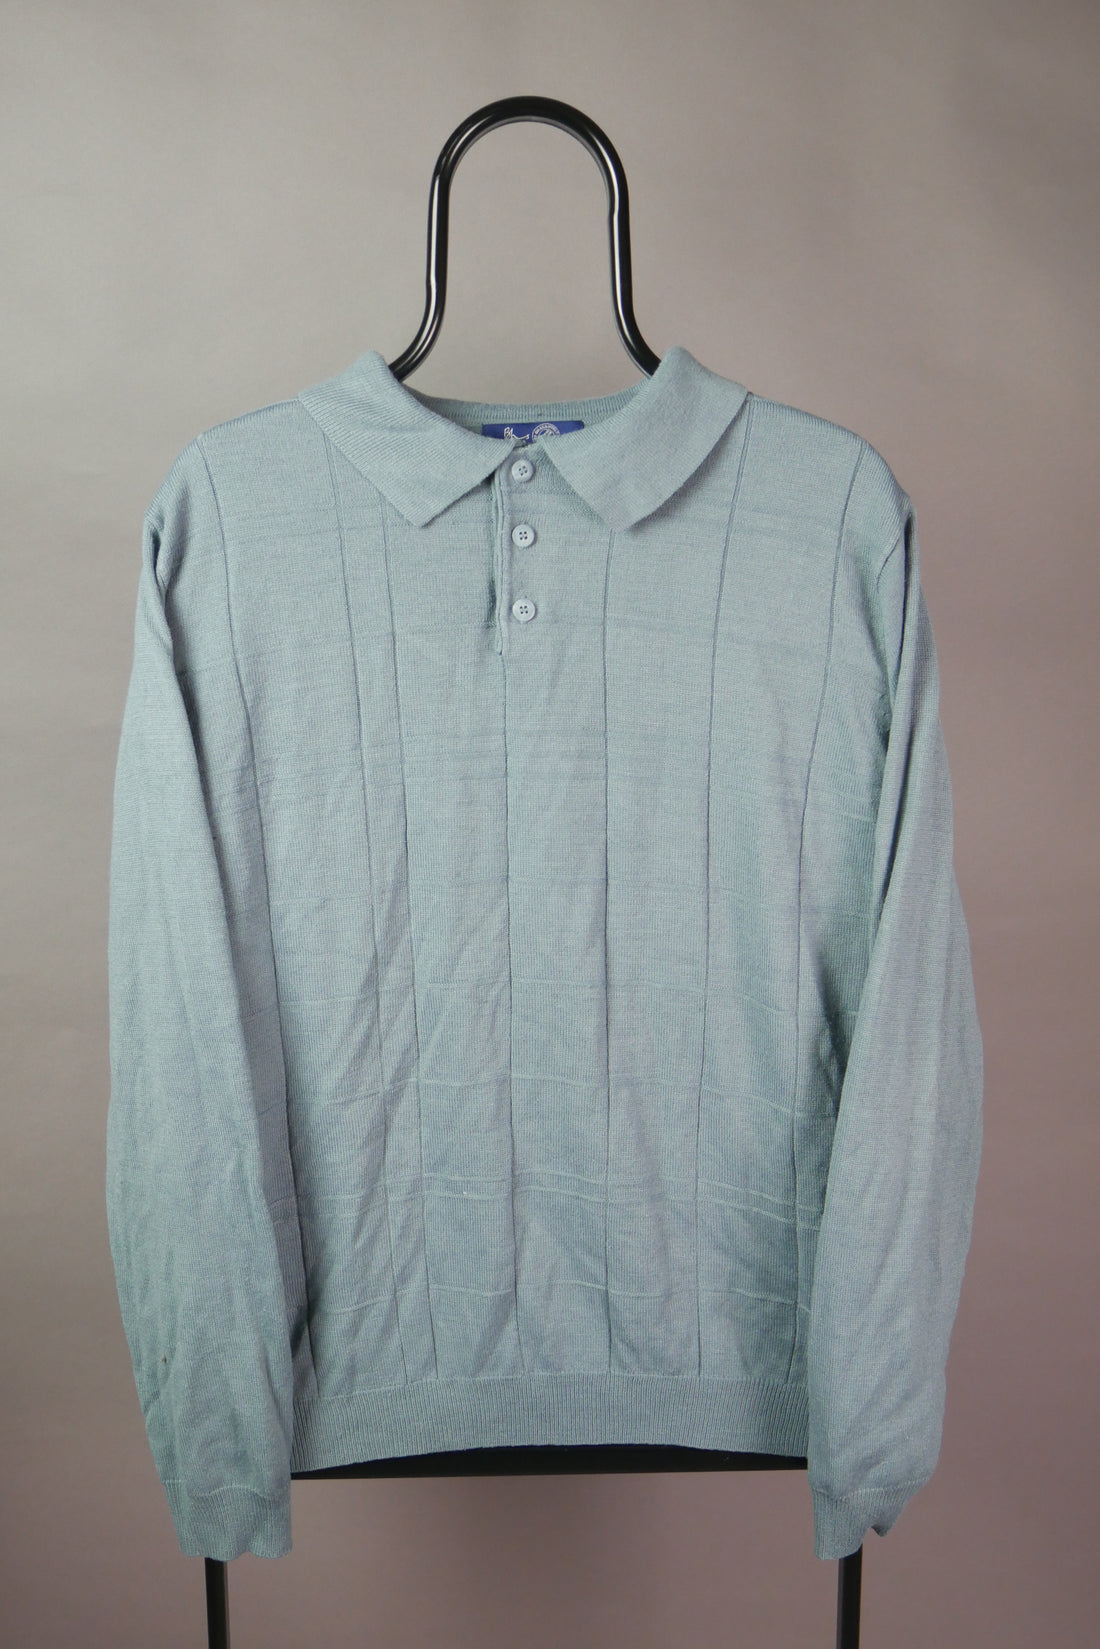 The Vintage BHS Collared Jumper (M)